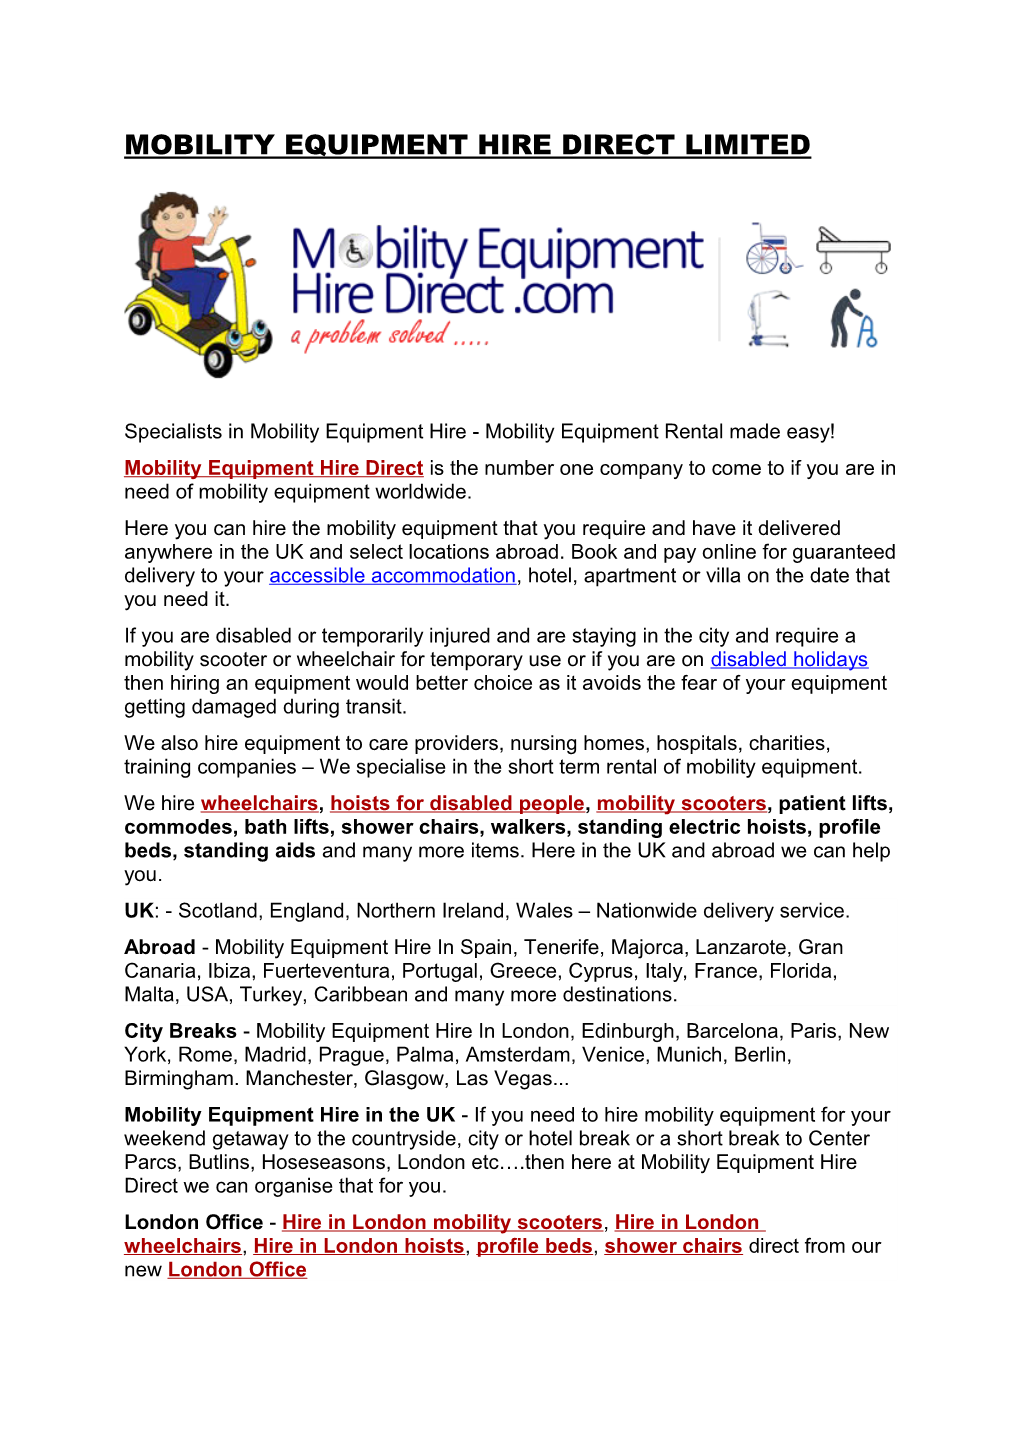 Mobility Equipment Hire Direct Limited